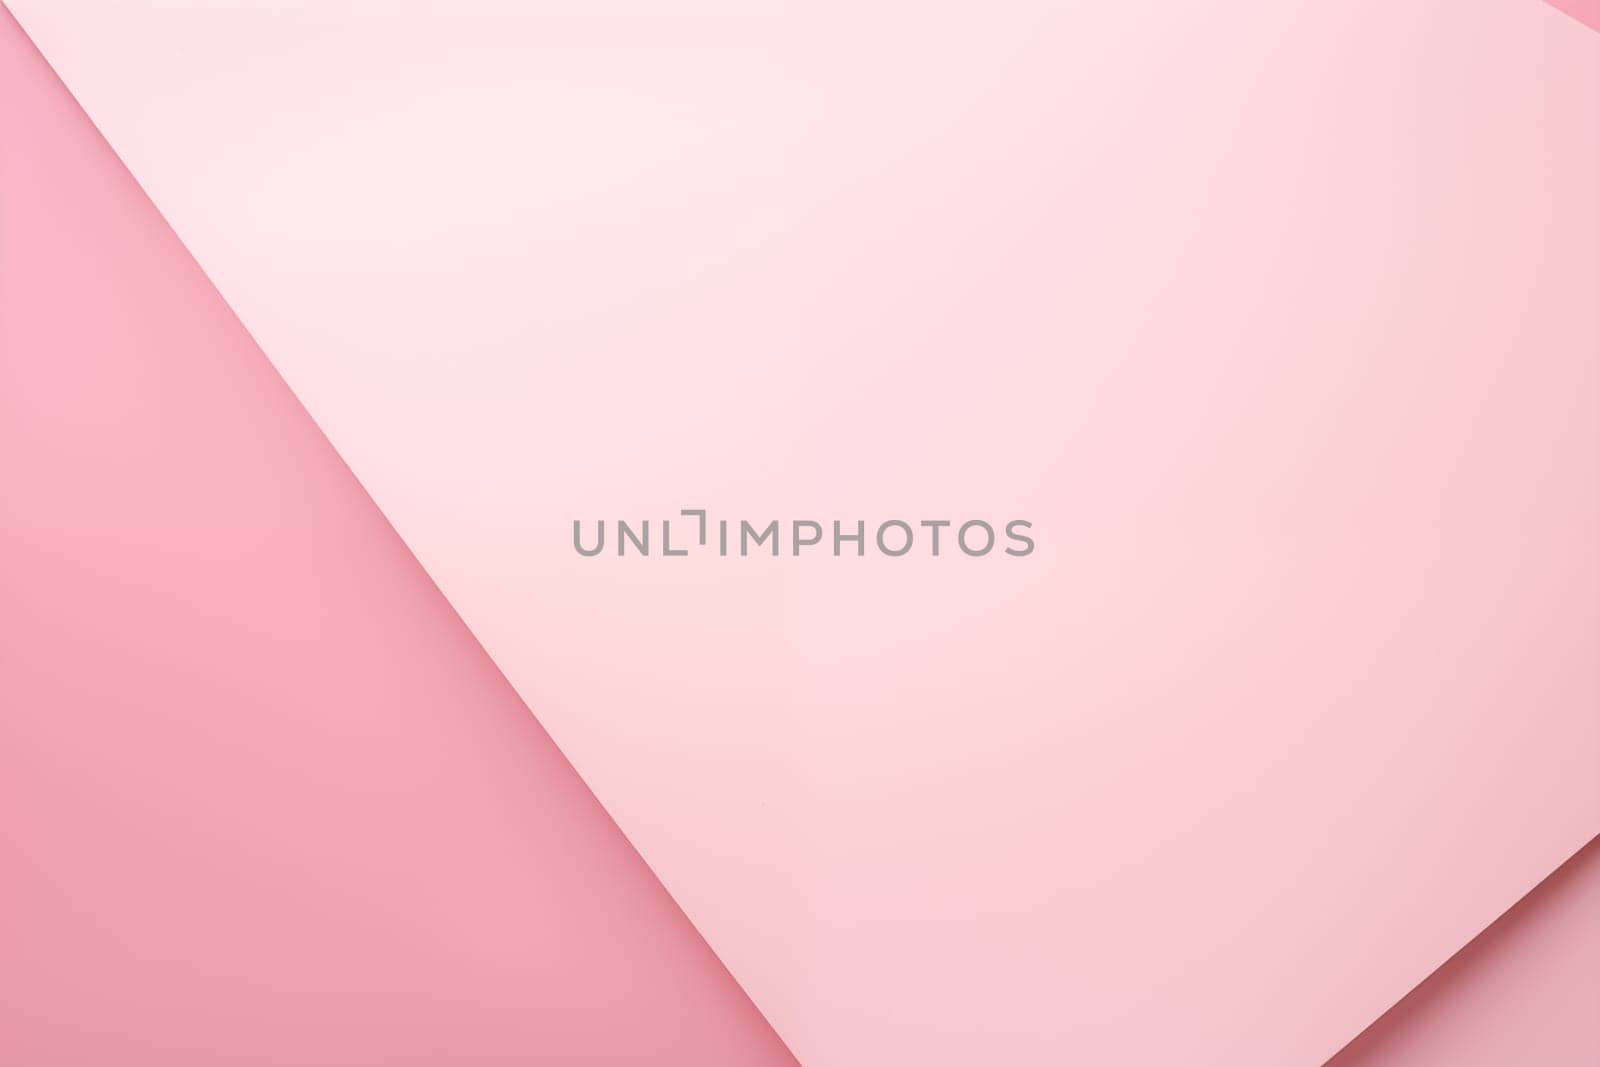 Abstract pastel pink colored paper texture geometric shapes and lines minimalist background flat lay copy space by Nadtochiy